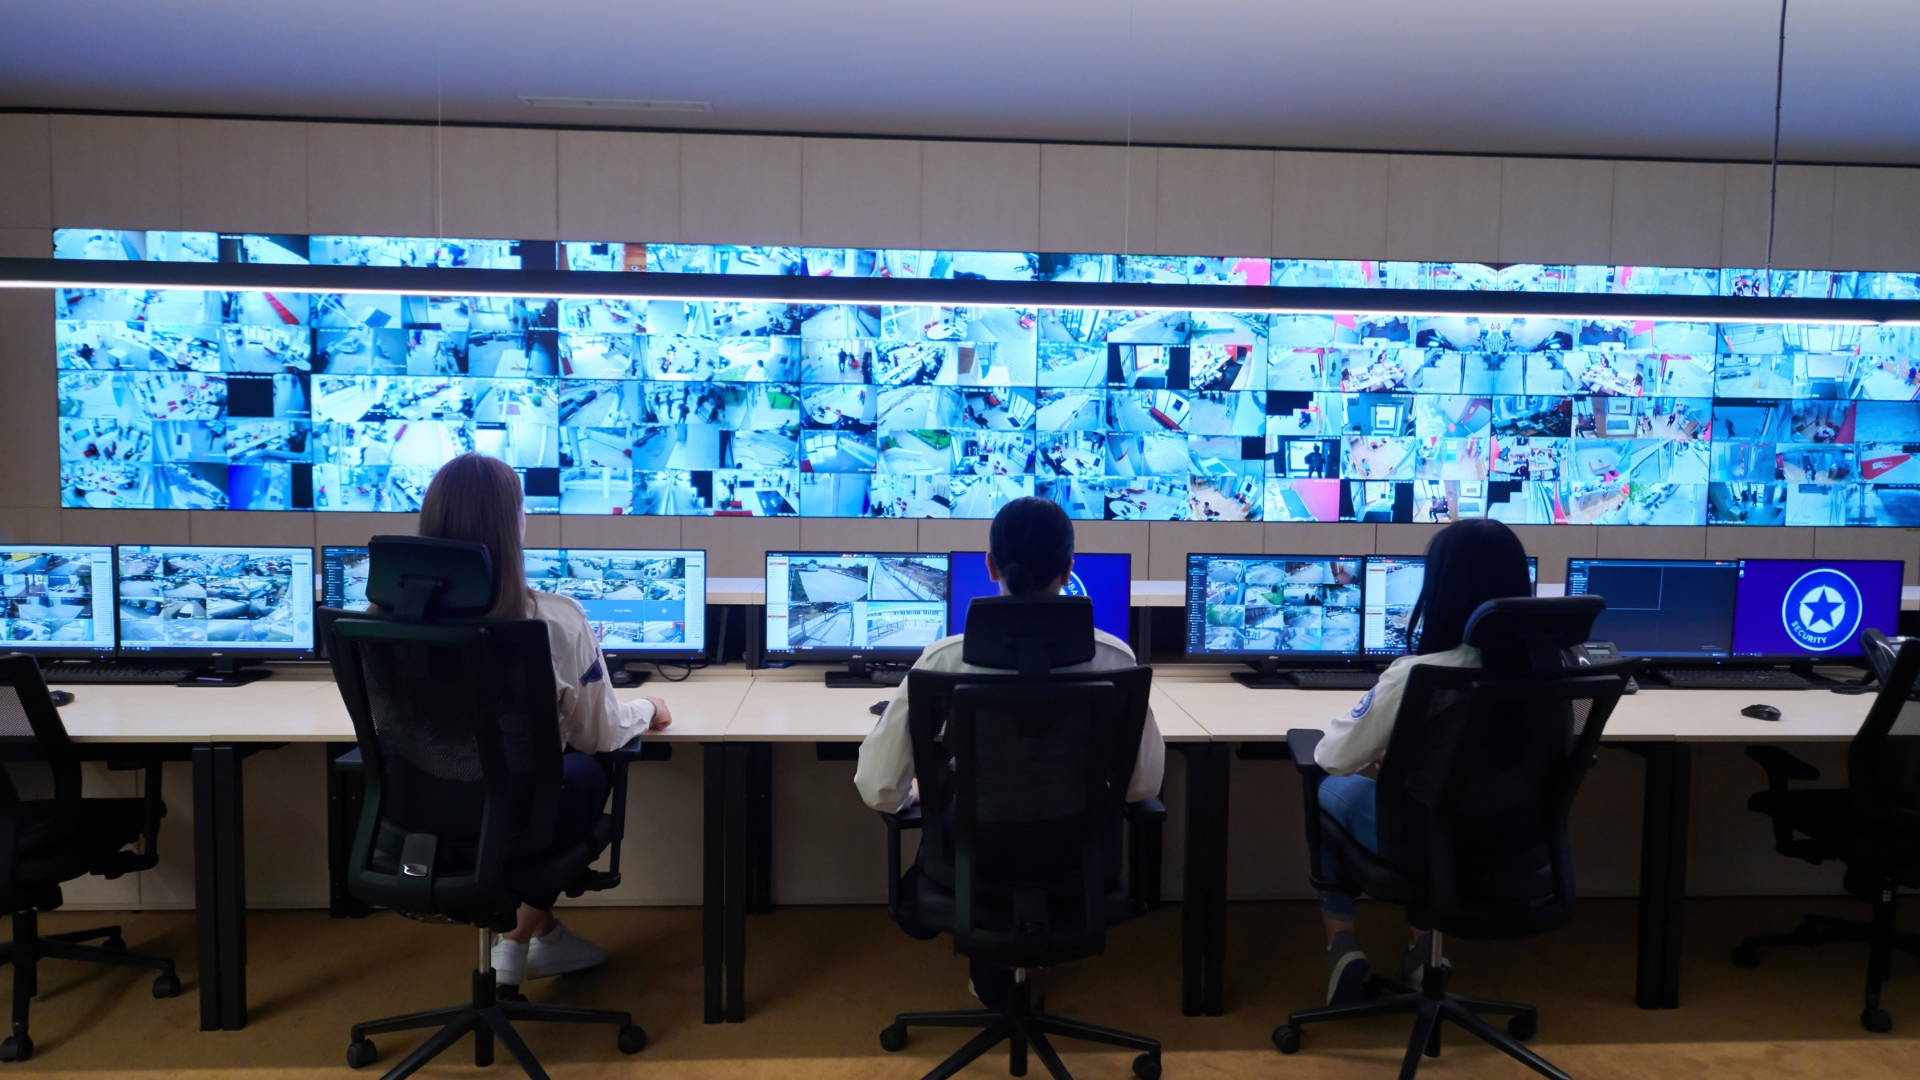 Security Control Room in Blacktown